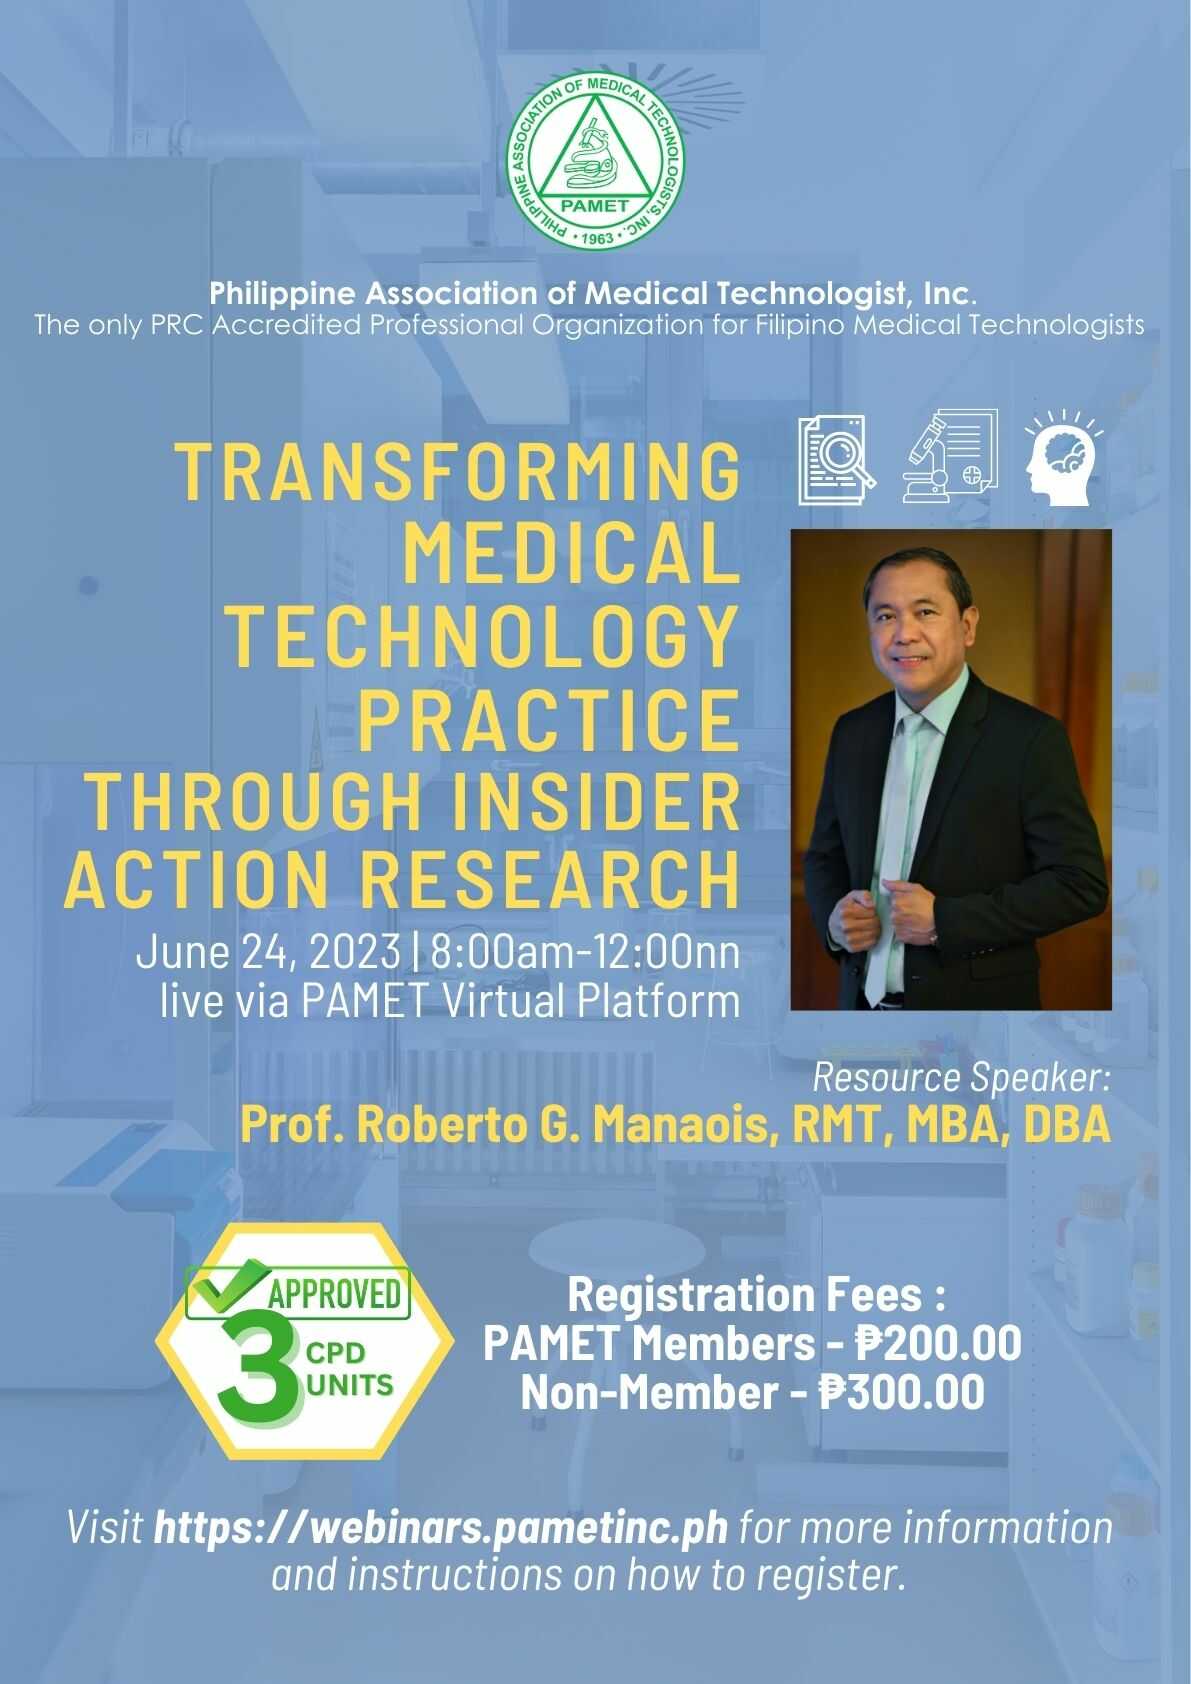 Transforming Medical Technology Practice Through Insider Action Research